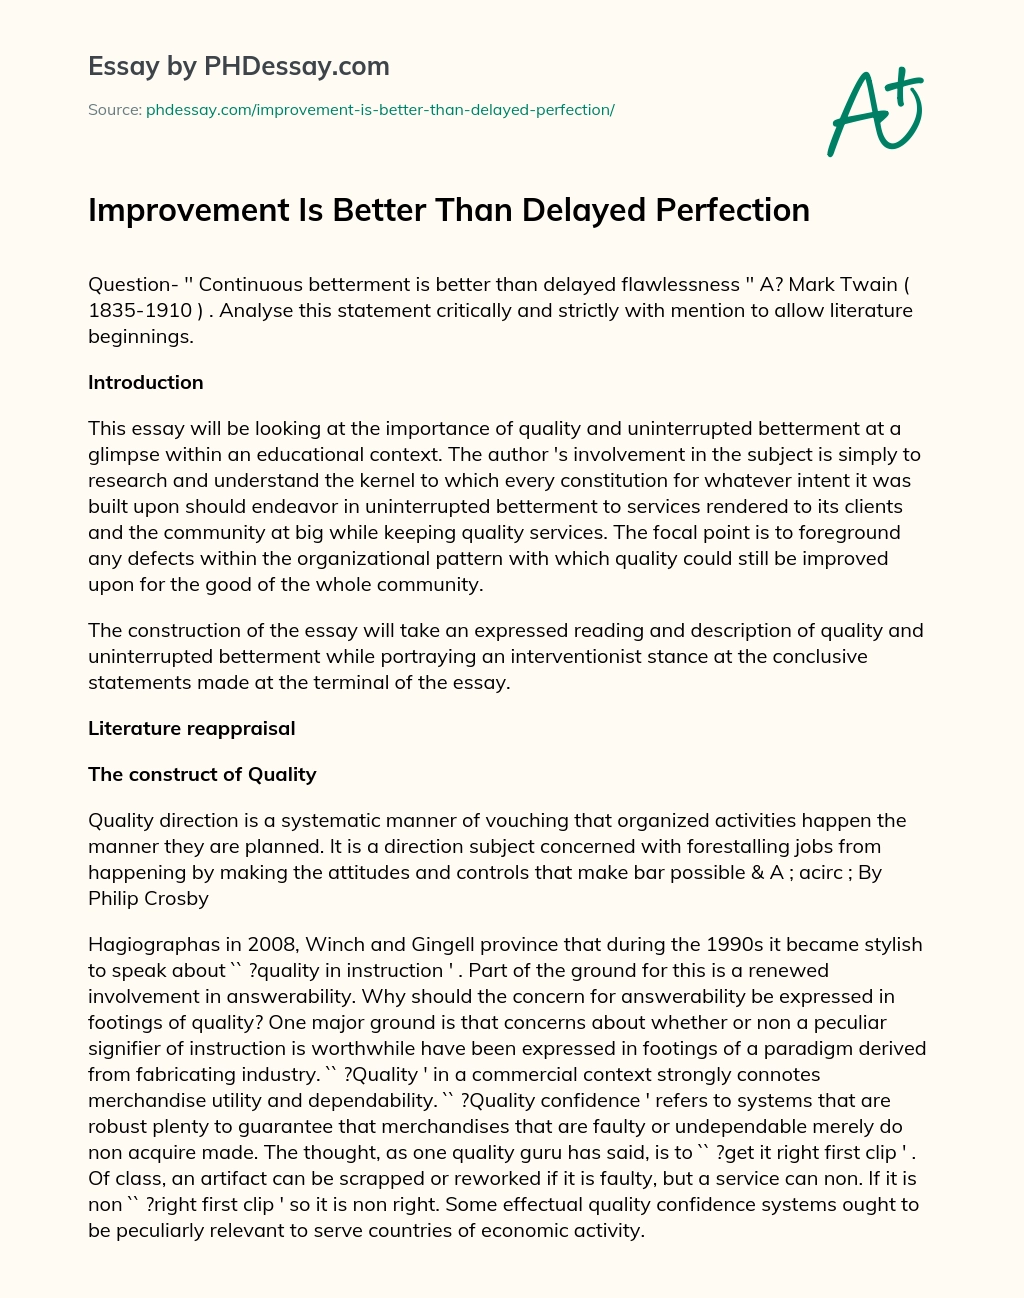 Improvement Is Better Than Delayed Perfection essay